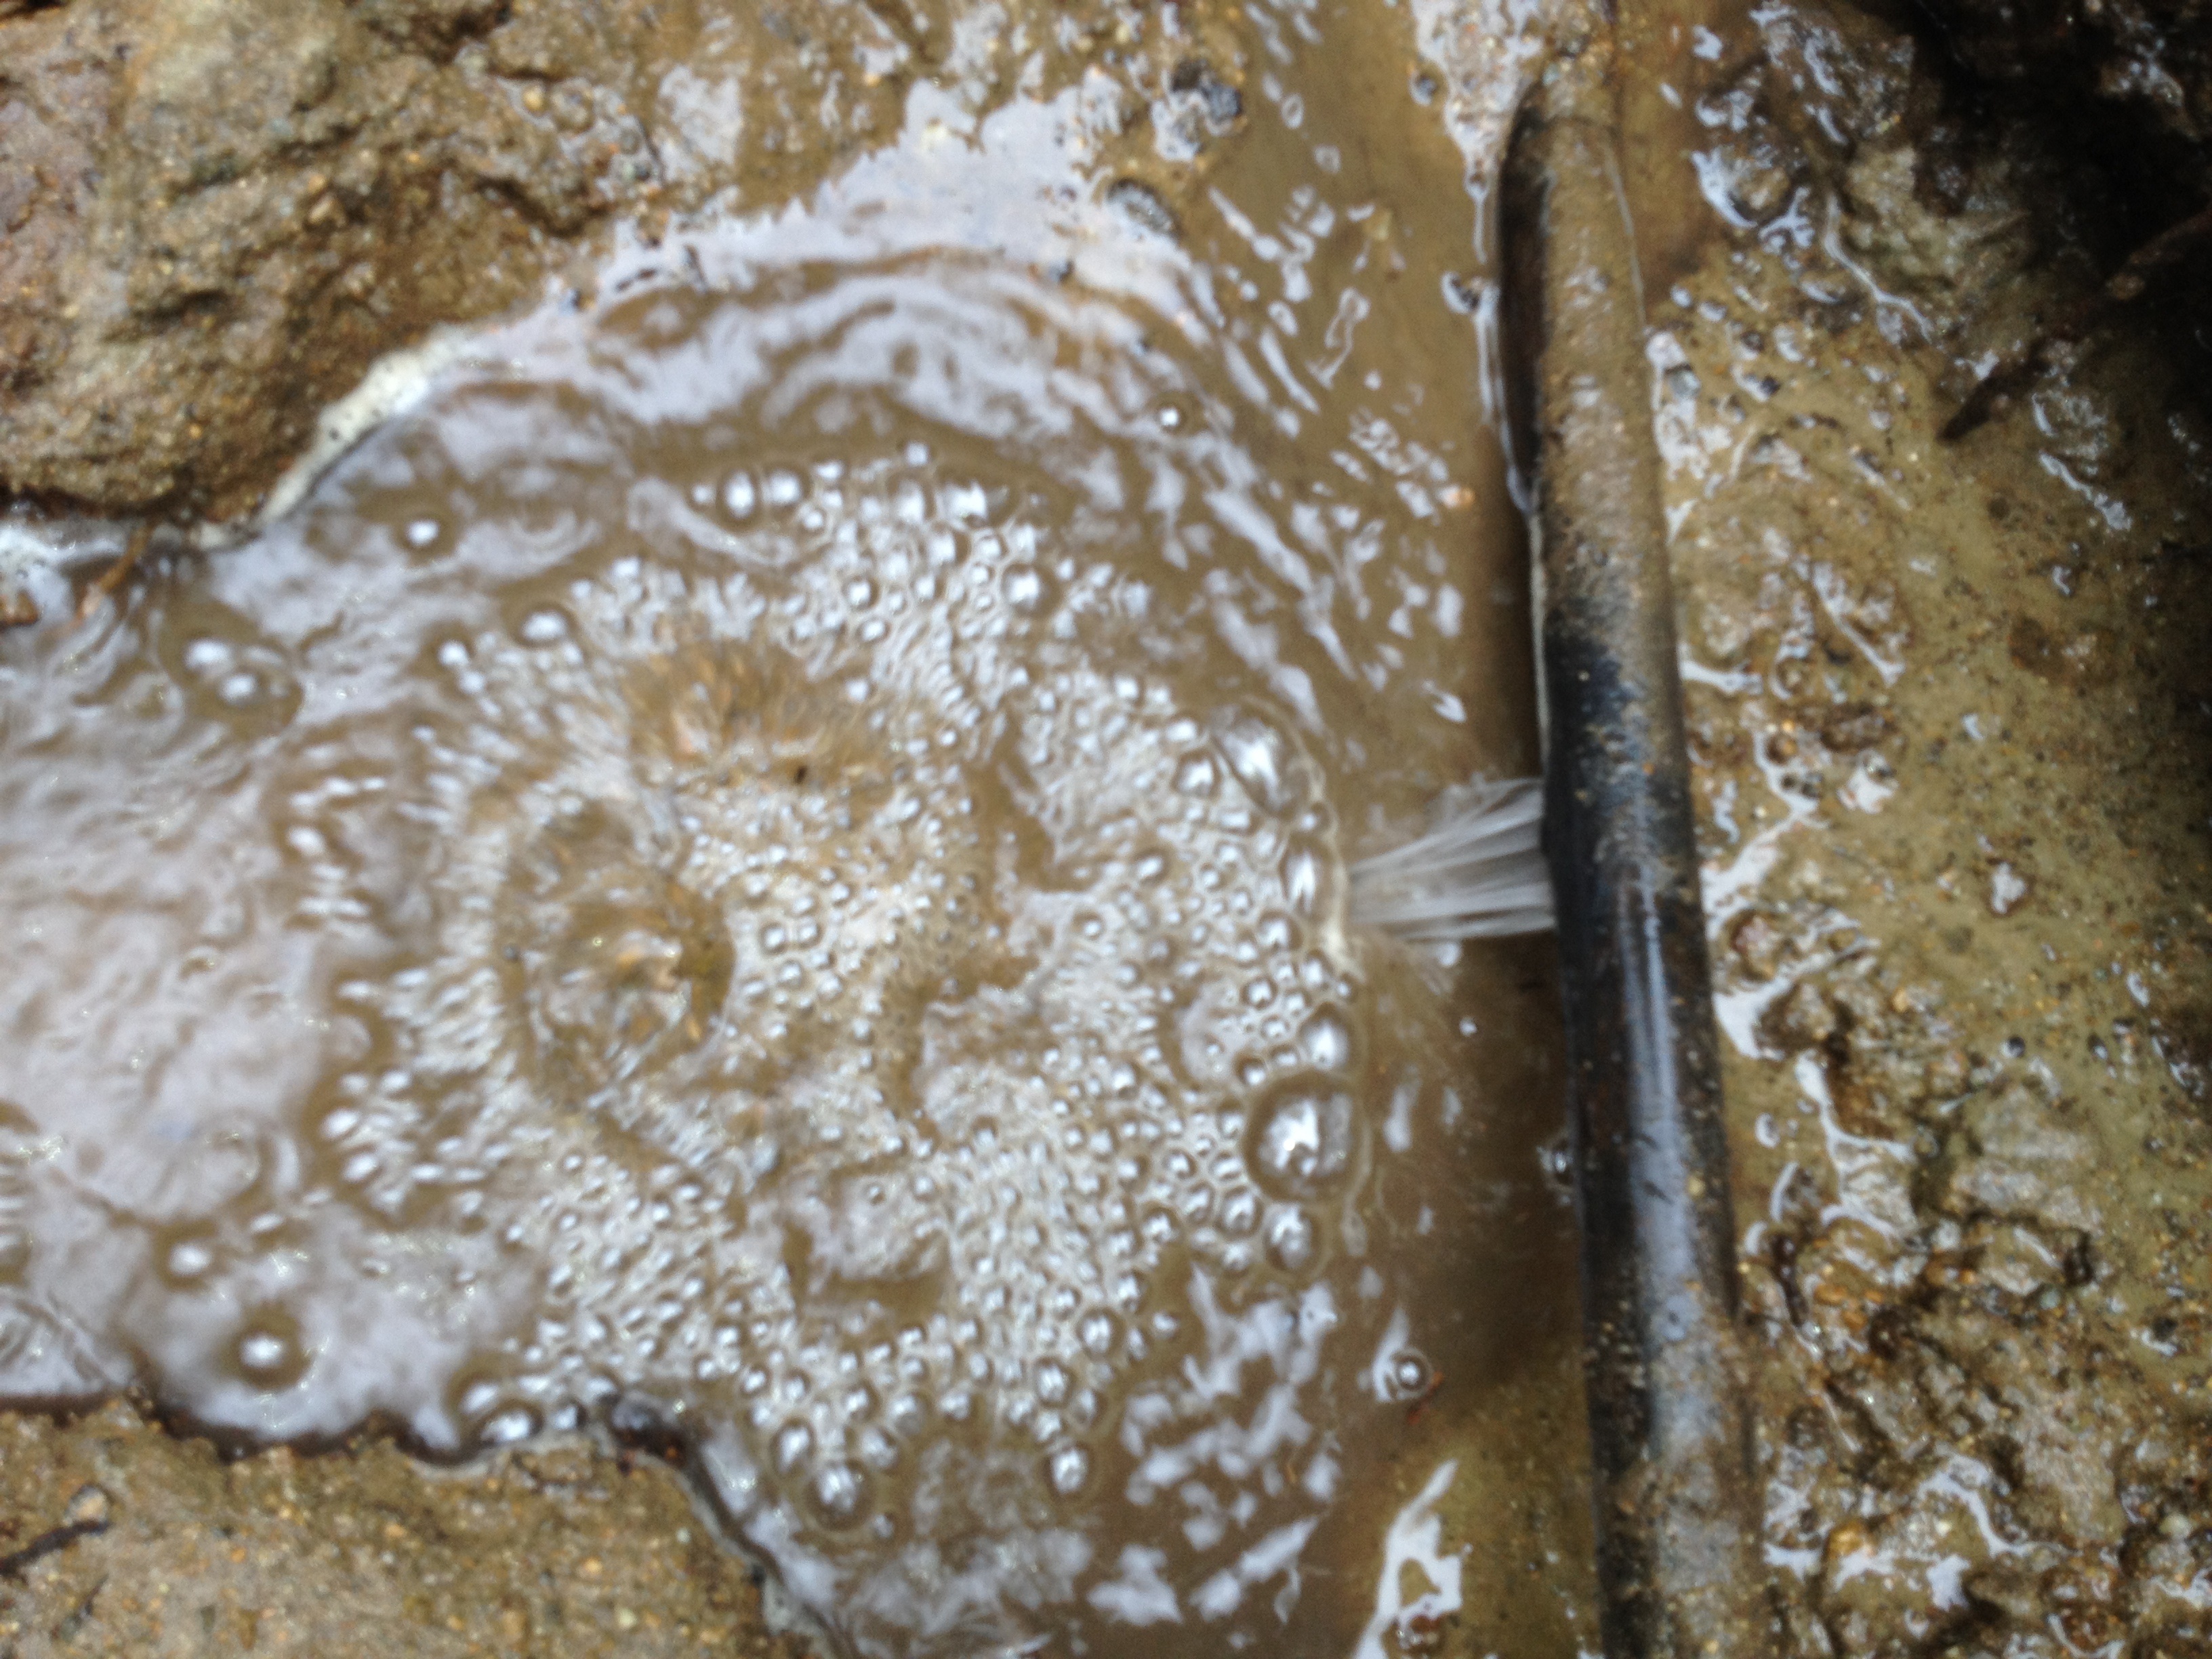 plastic pipe spraying water into a muddy puddle